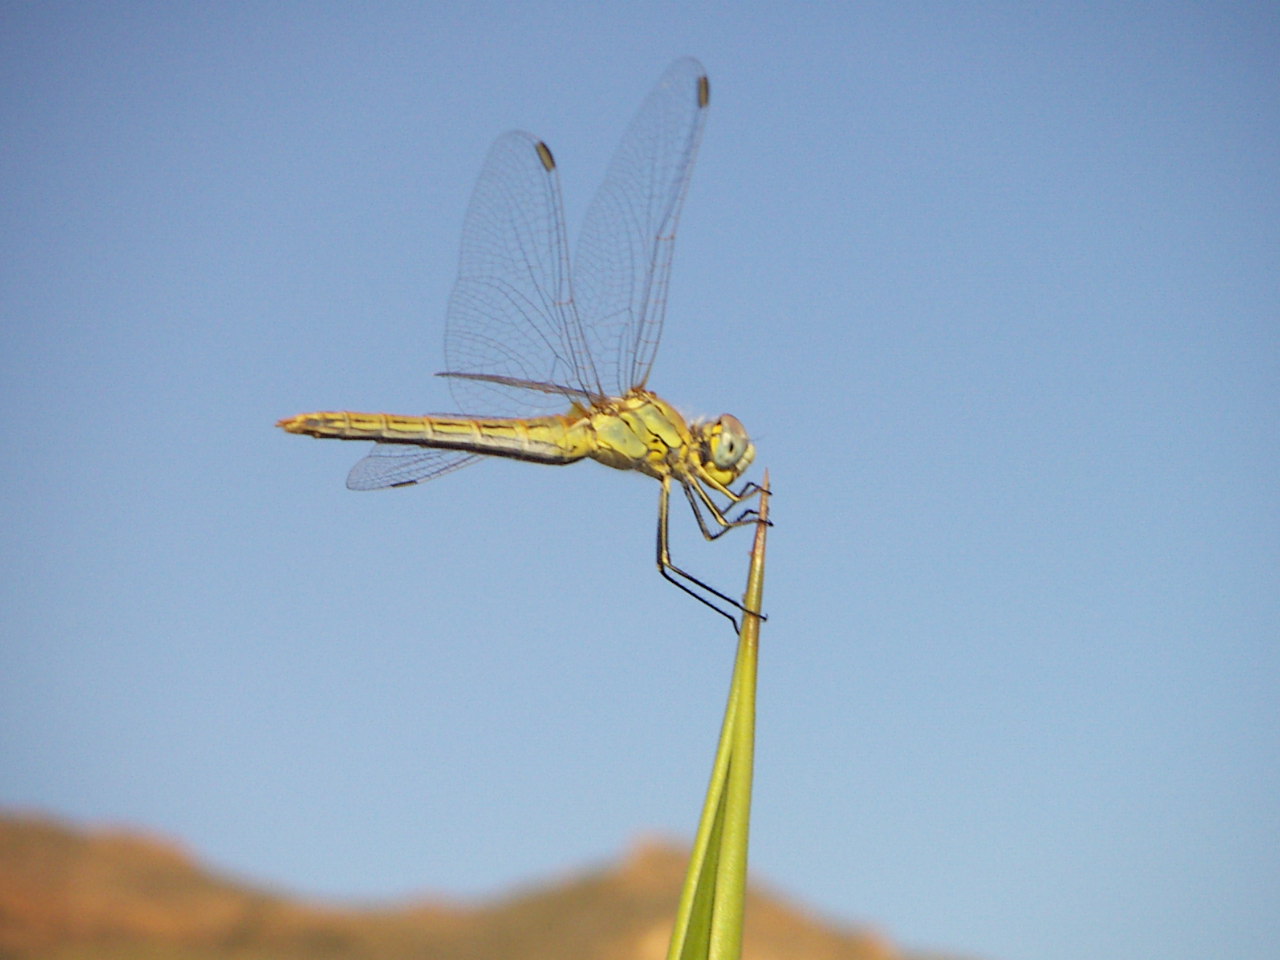 Dainty Dragonfly - Insects, Arachnids, Reptiles & Amphibians, Insect | Dragonfly | Fly | Winged | Wing | Sky | Blue | Nature